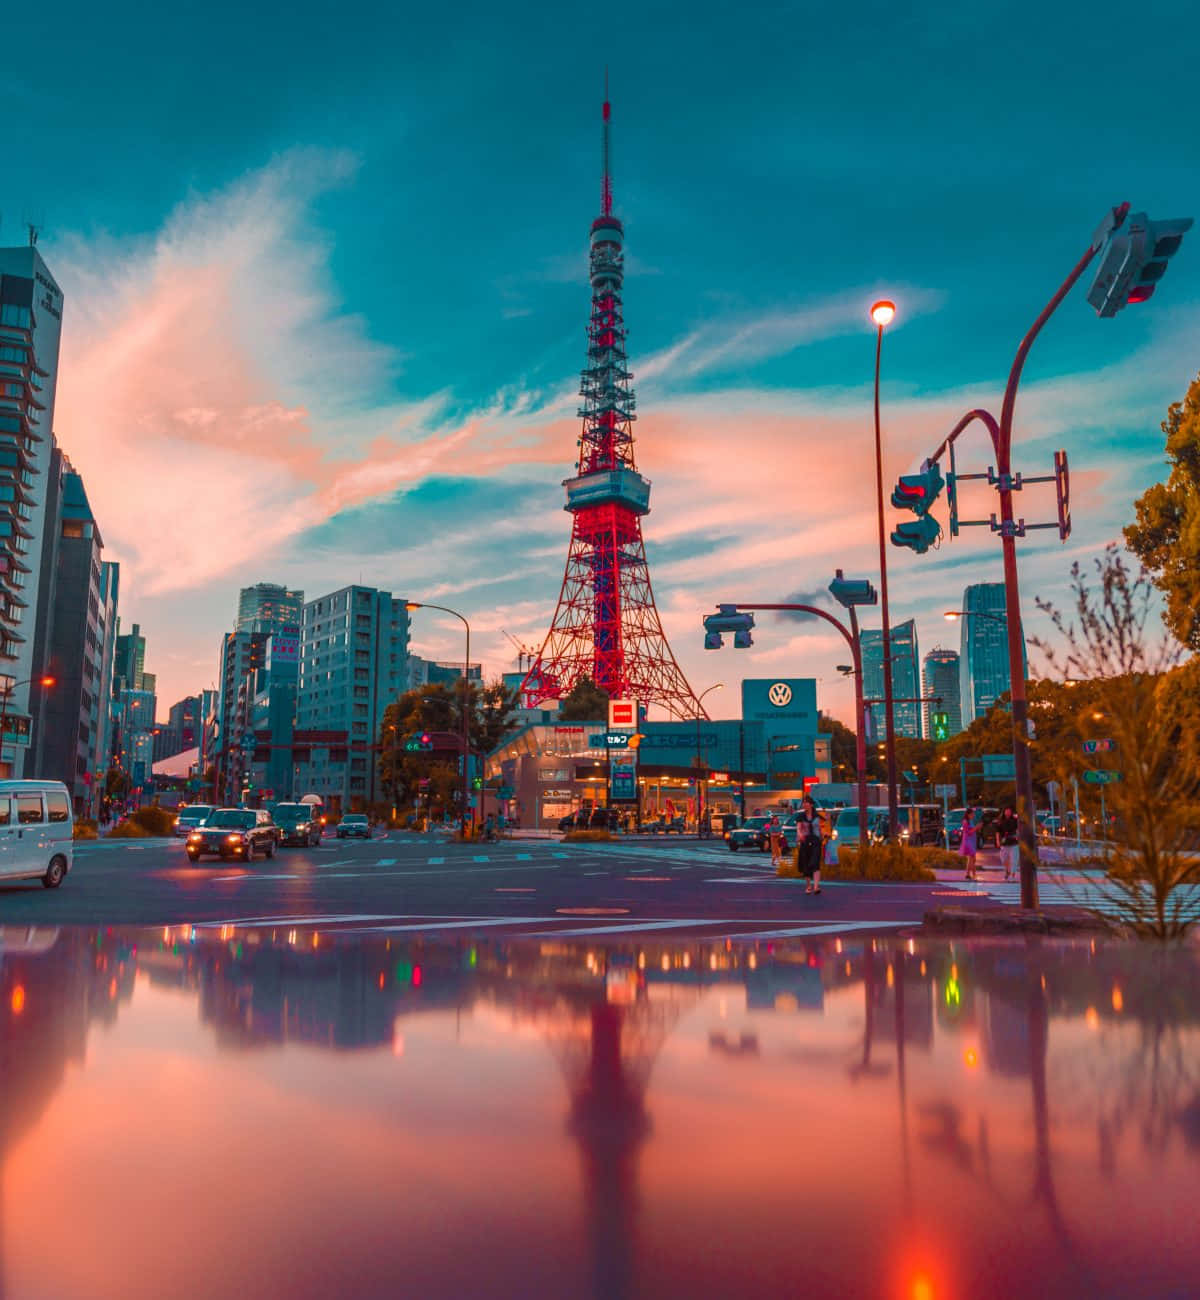 Take in the beauty of Tokyo nightscape